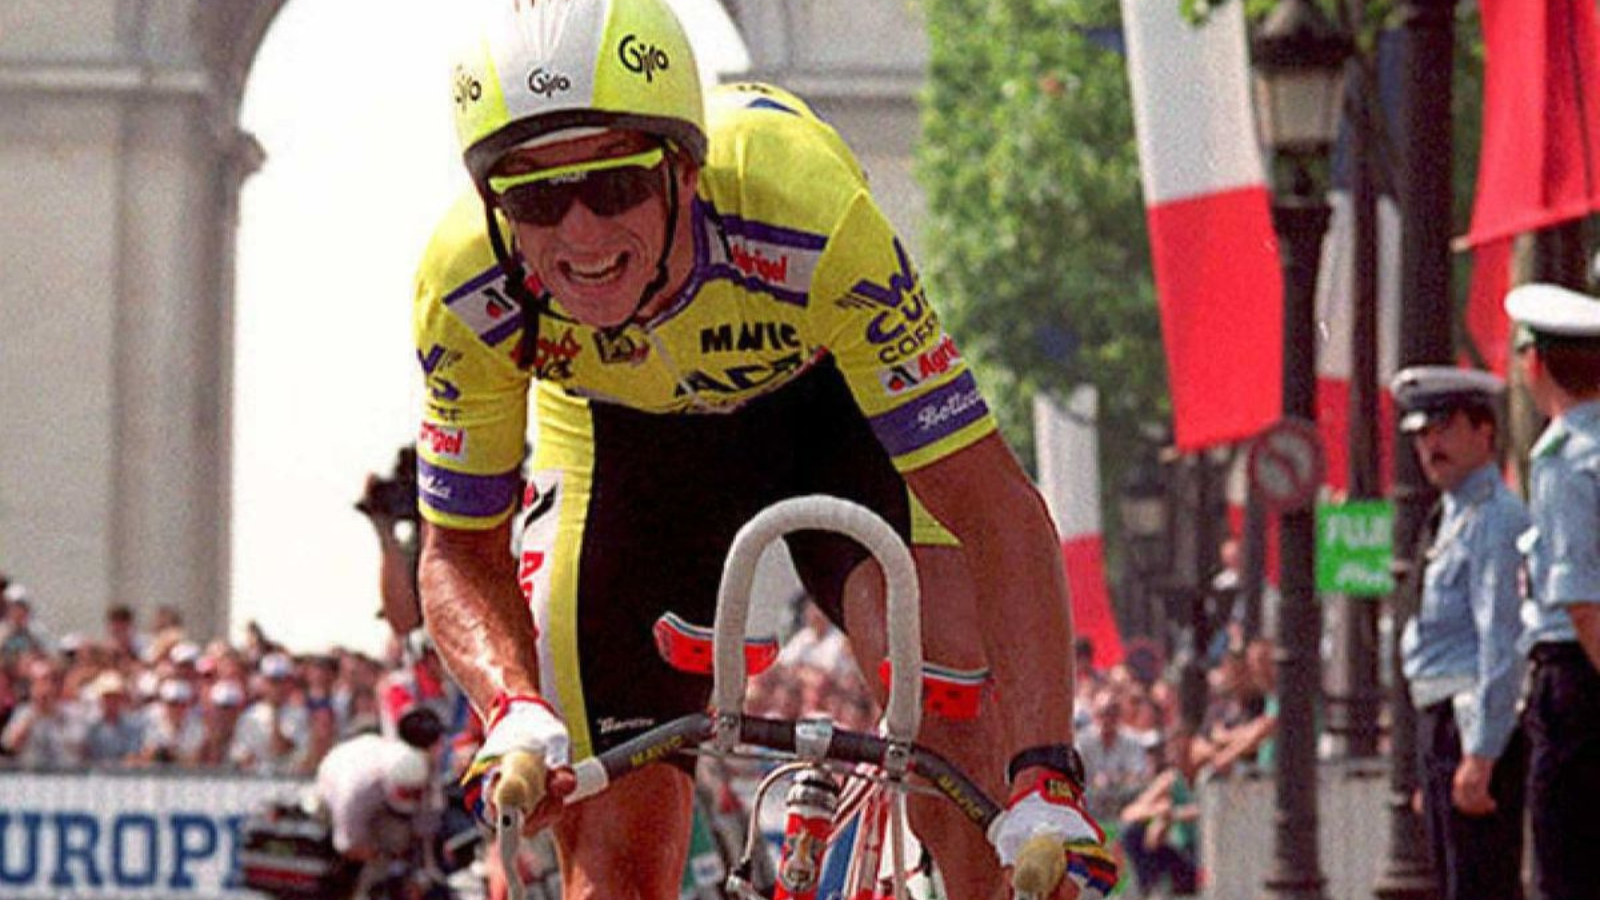 US cyclist Greg Lemond in the final stage, the famous individual time trial in Paris of Tour de France 1989